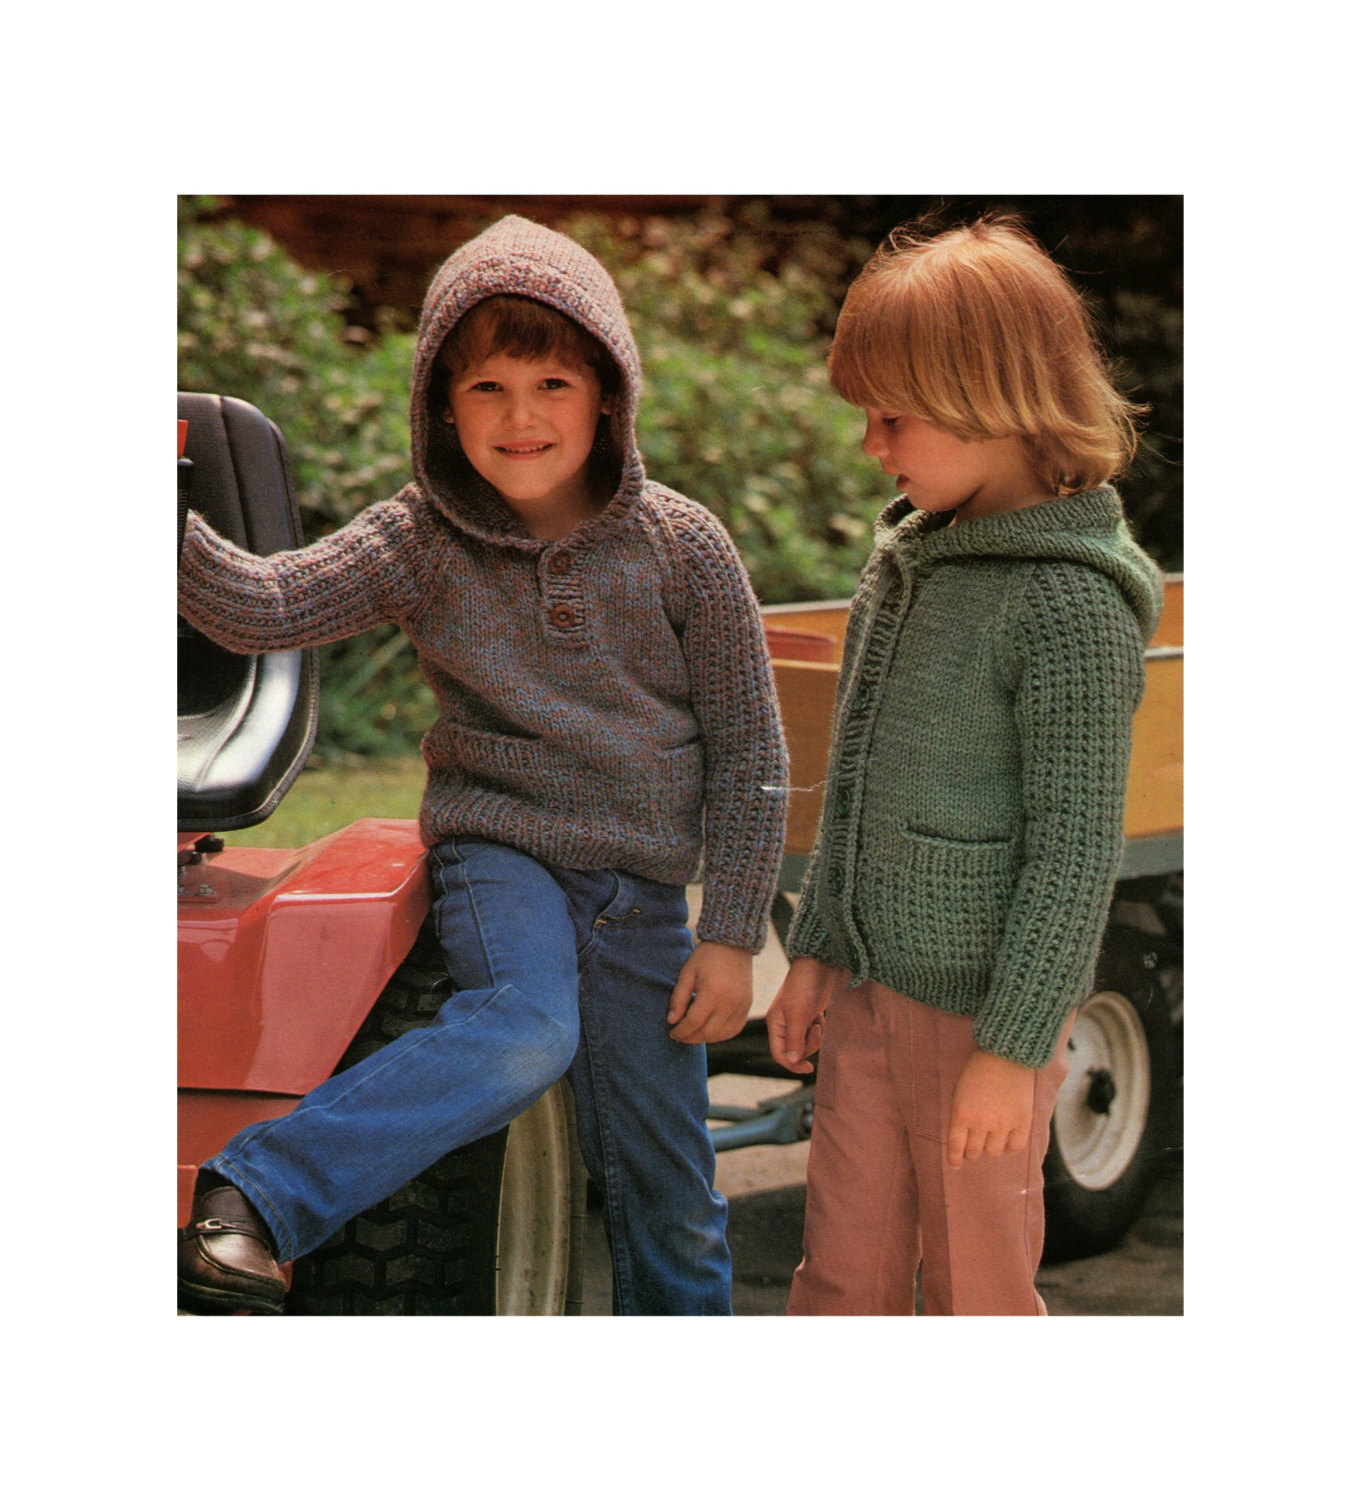 Hooded Jumper Knitting Pattern Childrens Hooded Sweater And Cardigan Knitting Pattern Pdf For